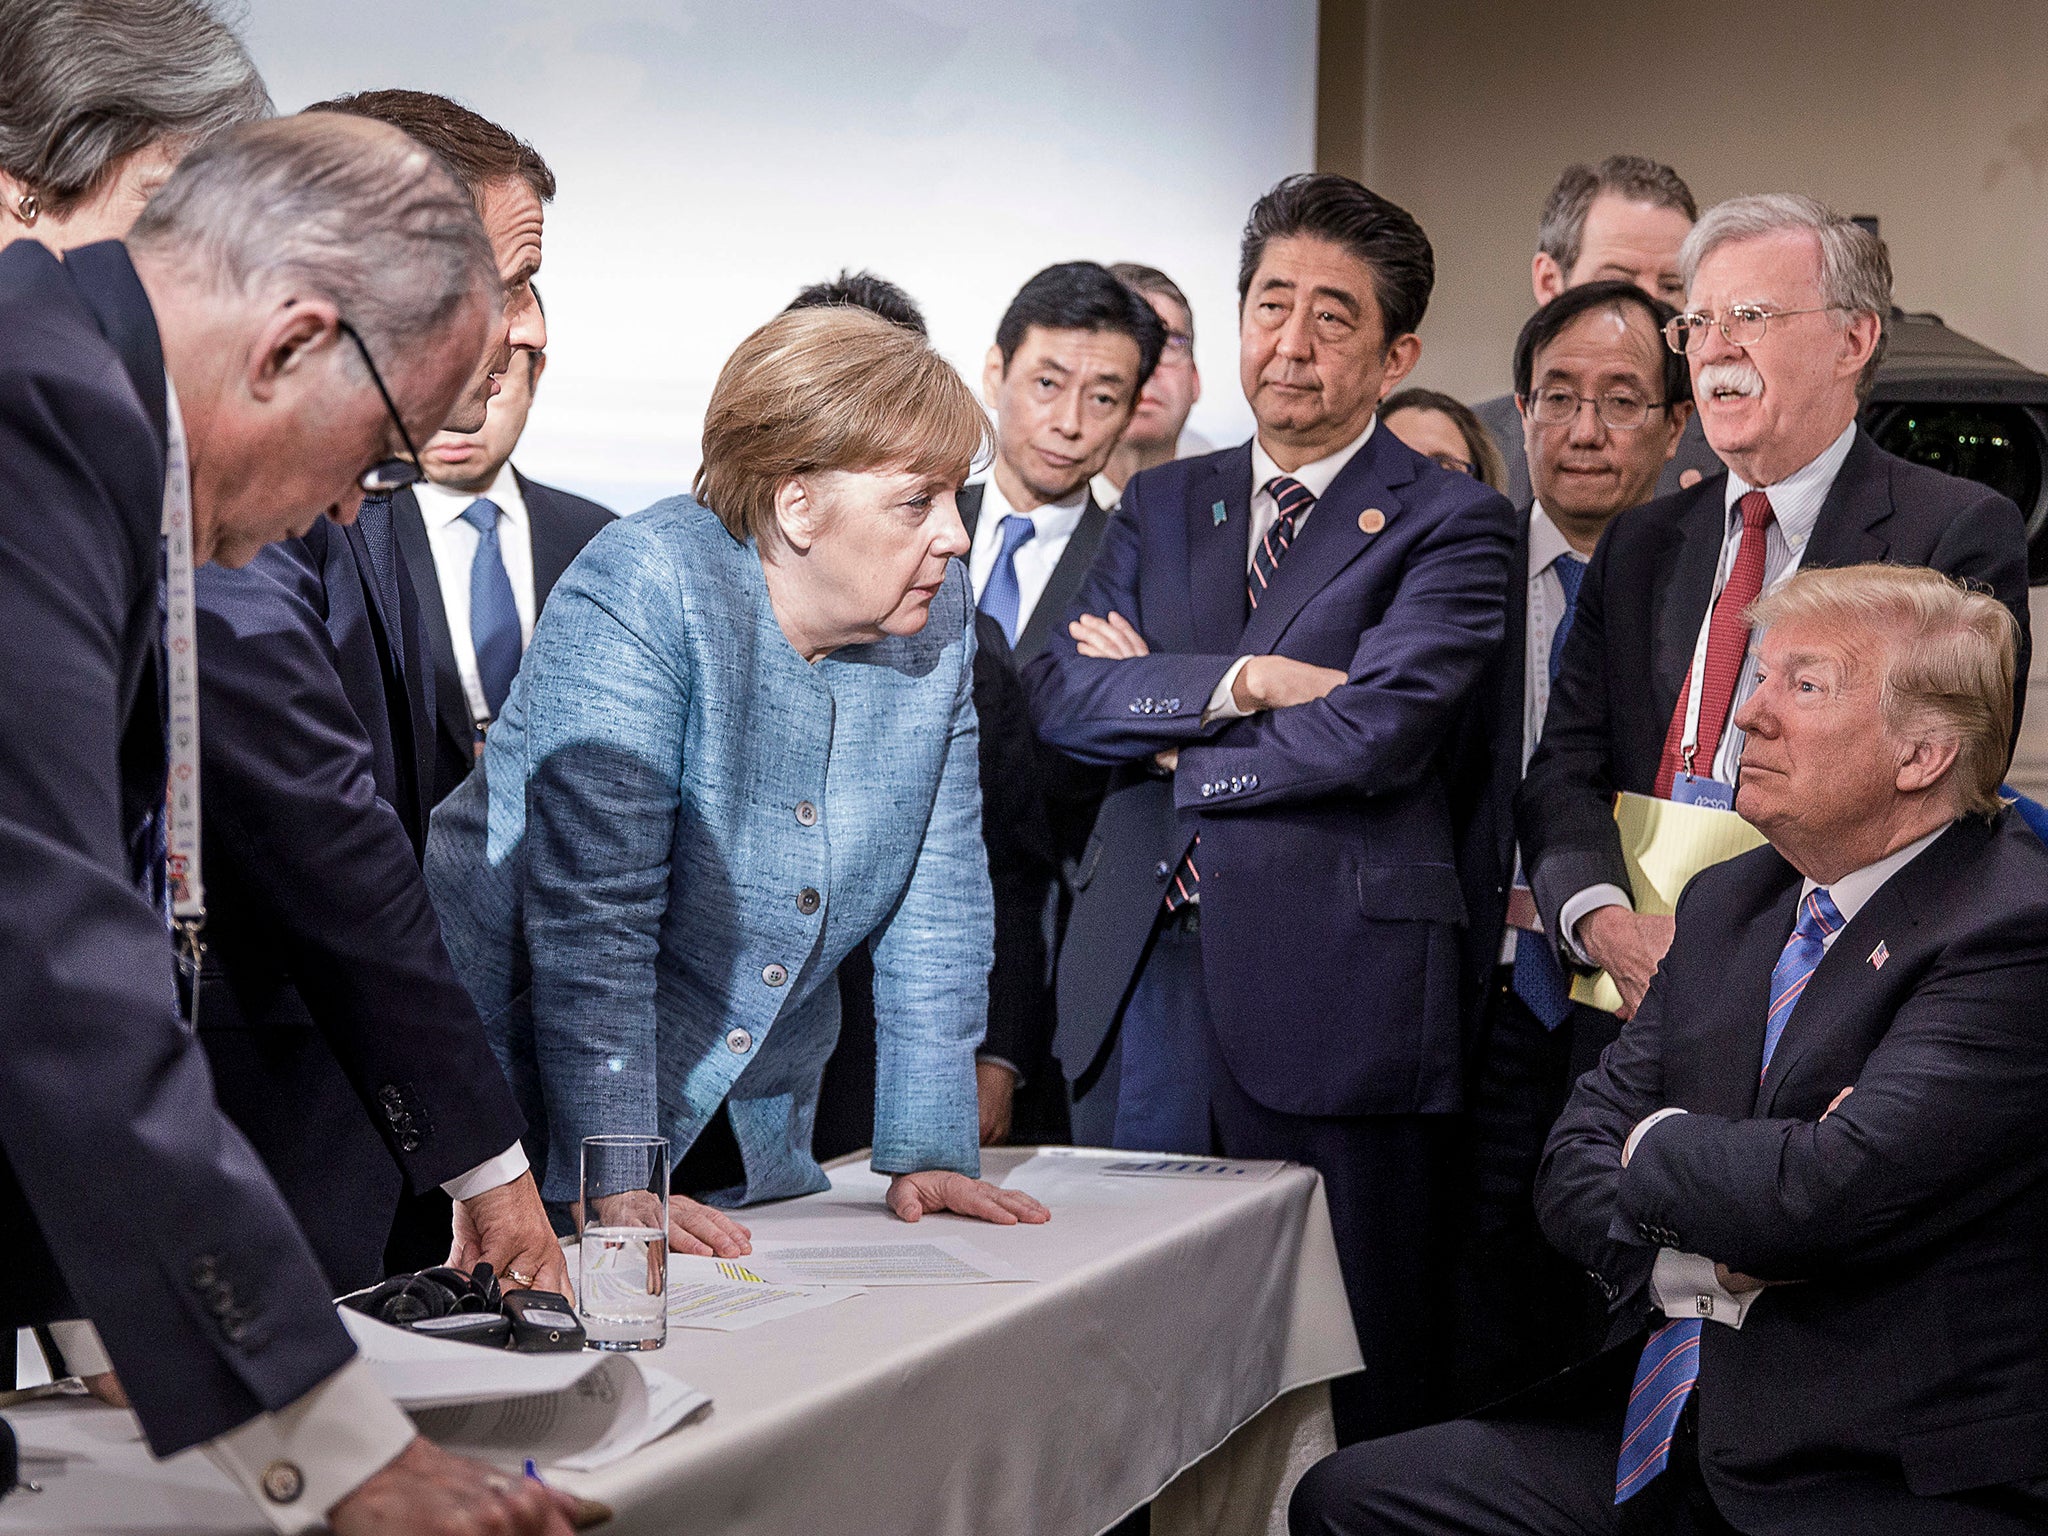 French President Emmanuel Macron, German Chancellor Angela Merkel and Japan's Prime Minister Shinzo Abe speaking to US Presidend Donald Trump during the second day of the G7 meeting in Charlevoix, Canada. Looking on is US National Security Advisor John R. Bolton.